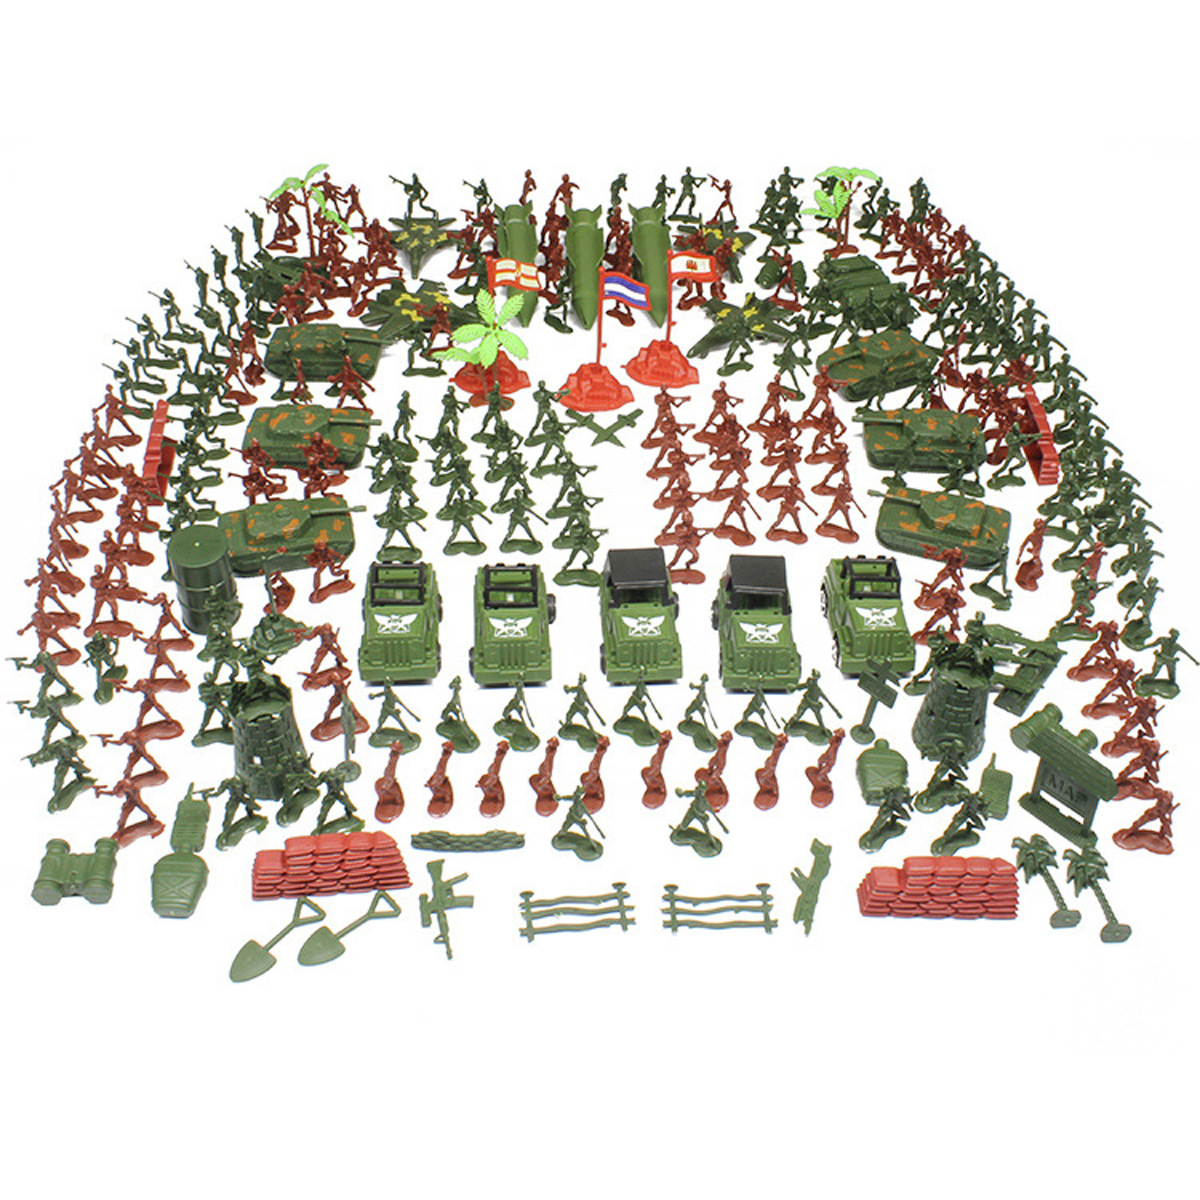 

307pcs Soldiers Grenade T ank Aircraft Rocket Army Men Sand Scene Model Kids Toys